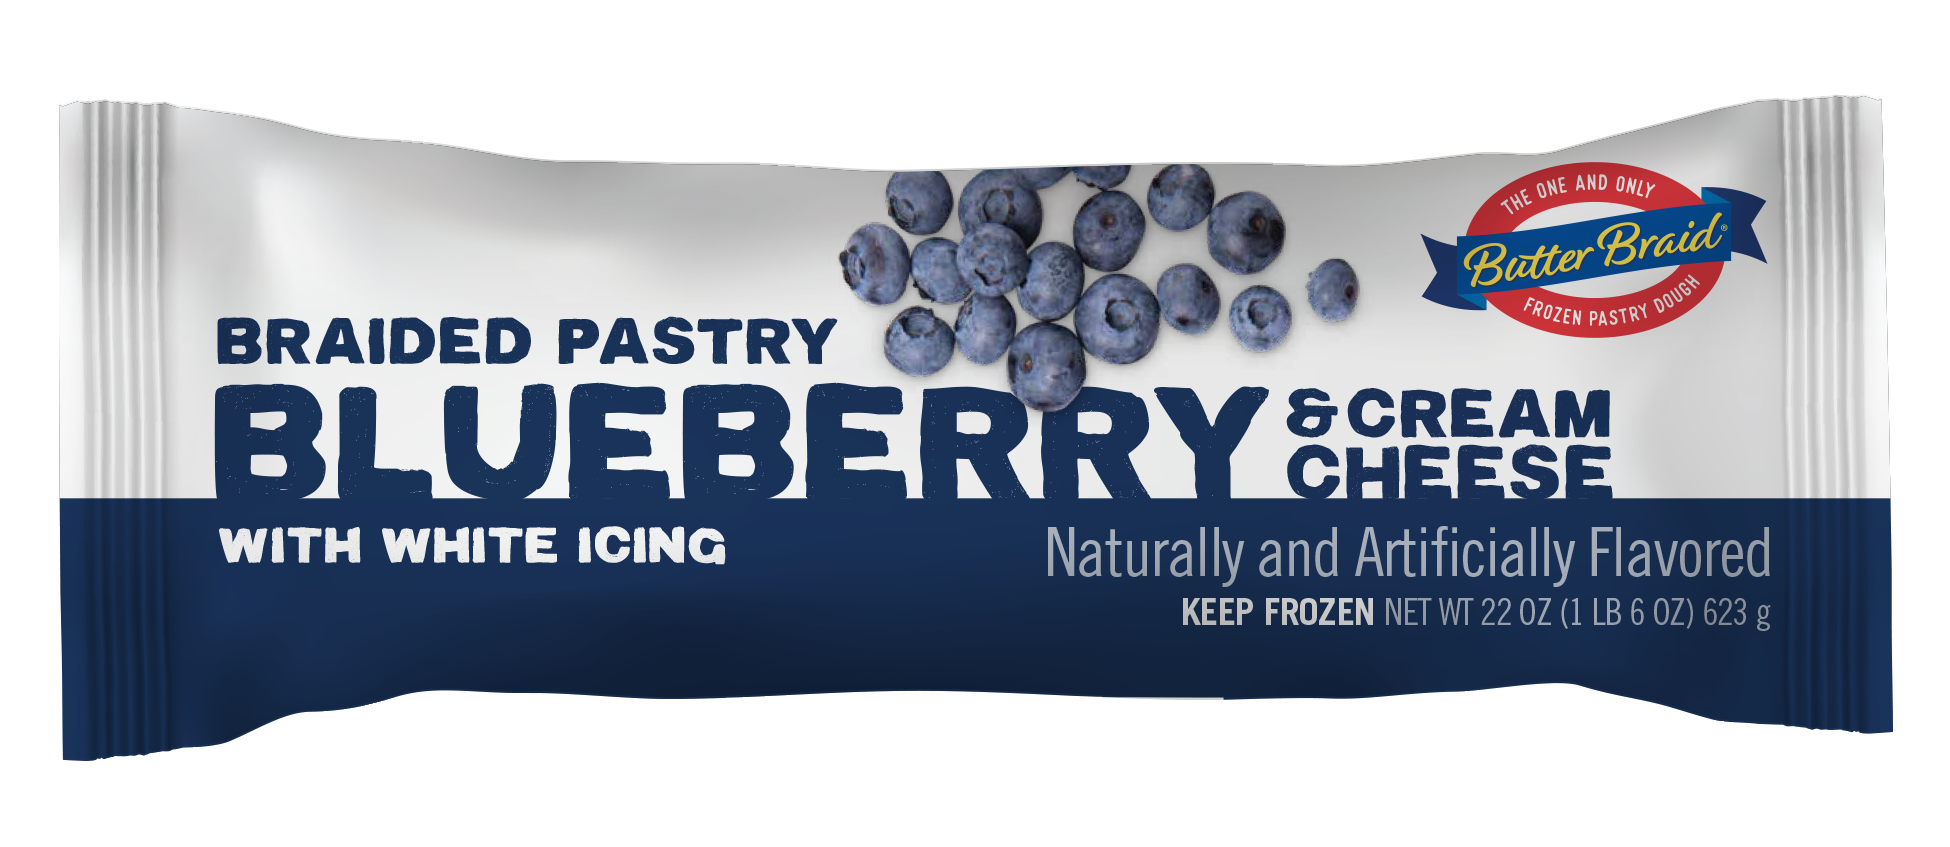 Blueberry & Cream Cheese pastry packaging